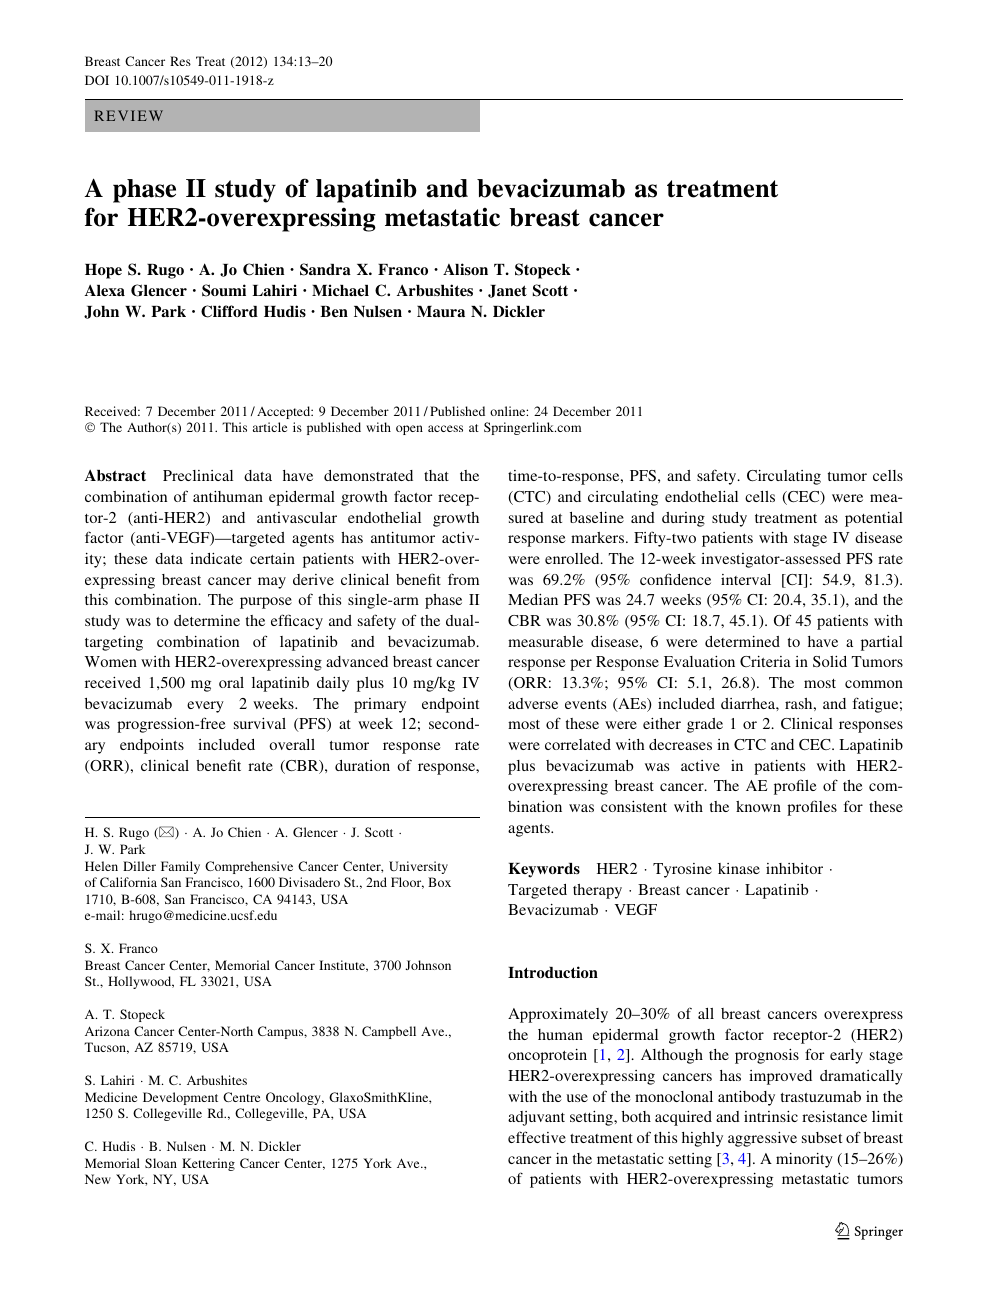 A Phase Ii Study Of Lapatinib And Bevacizumab As Treatment For Her2 Overexpressing Metastatic Breast Cancer Topic Of Research Paper In Clinical Medicine Download Scholarly Article Pdf And Read For Free On